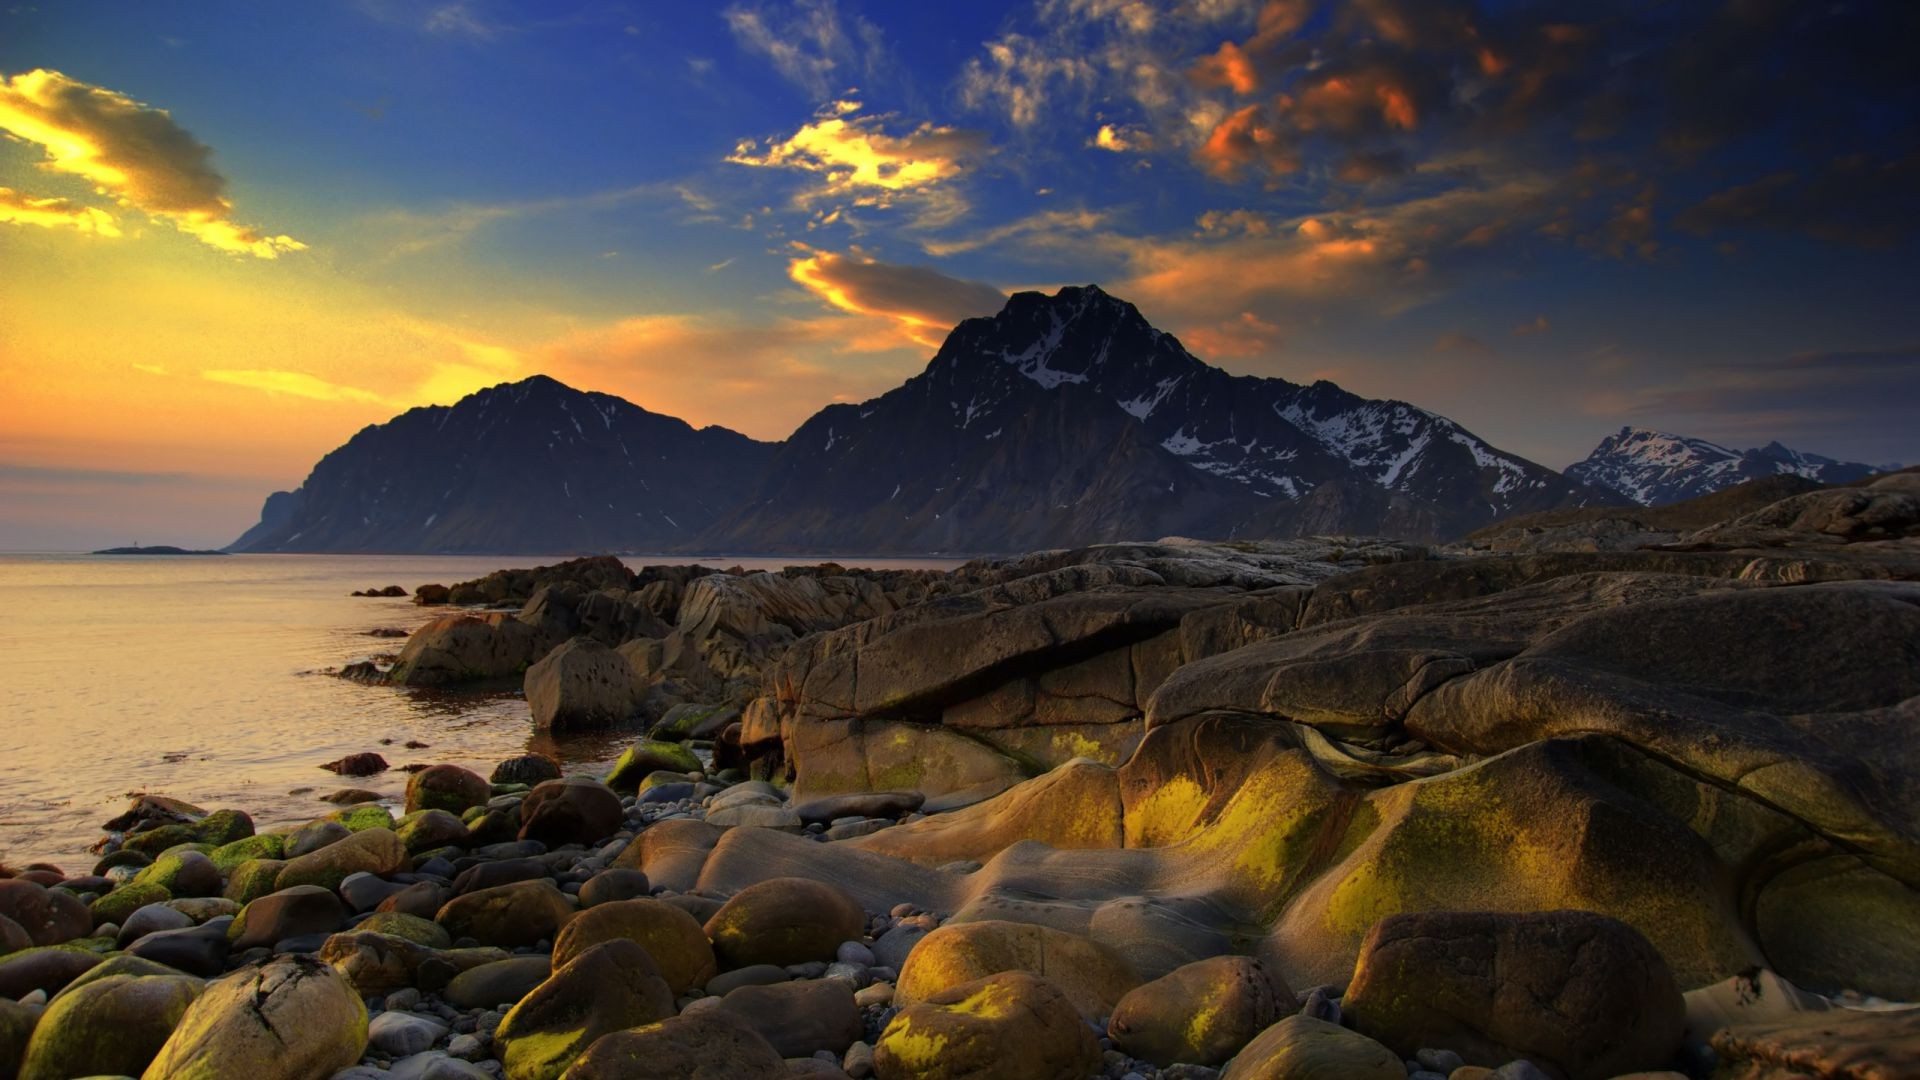 rocks boulders and stones water travel sunset mountain landscape dawn outdoors sky nature evening scenic snow rock lake